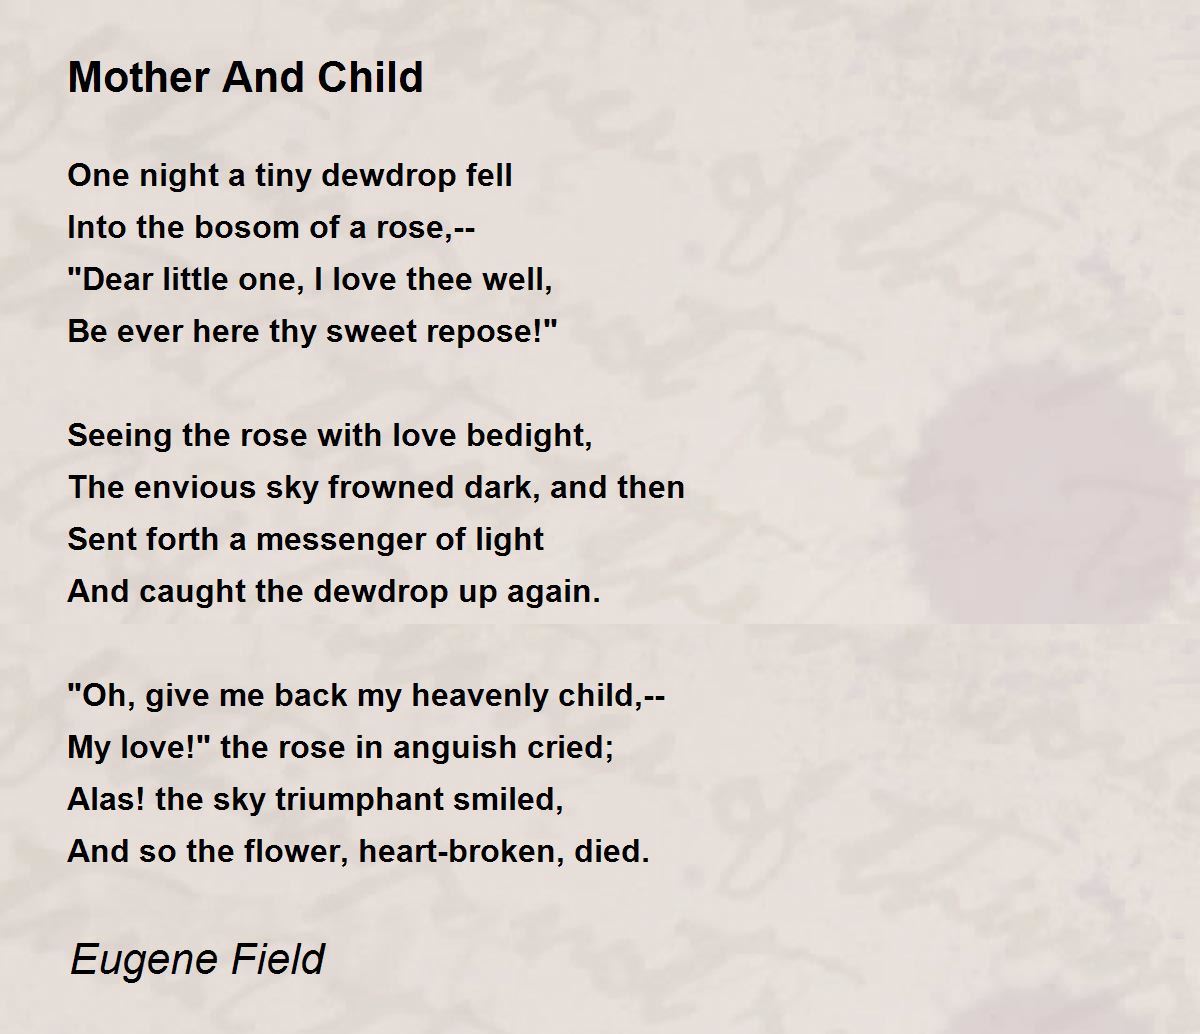 Mother And Child - Mother And Child Poem by Eugene Field